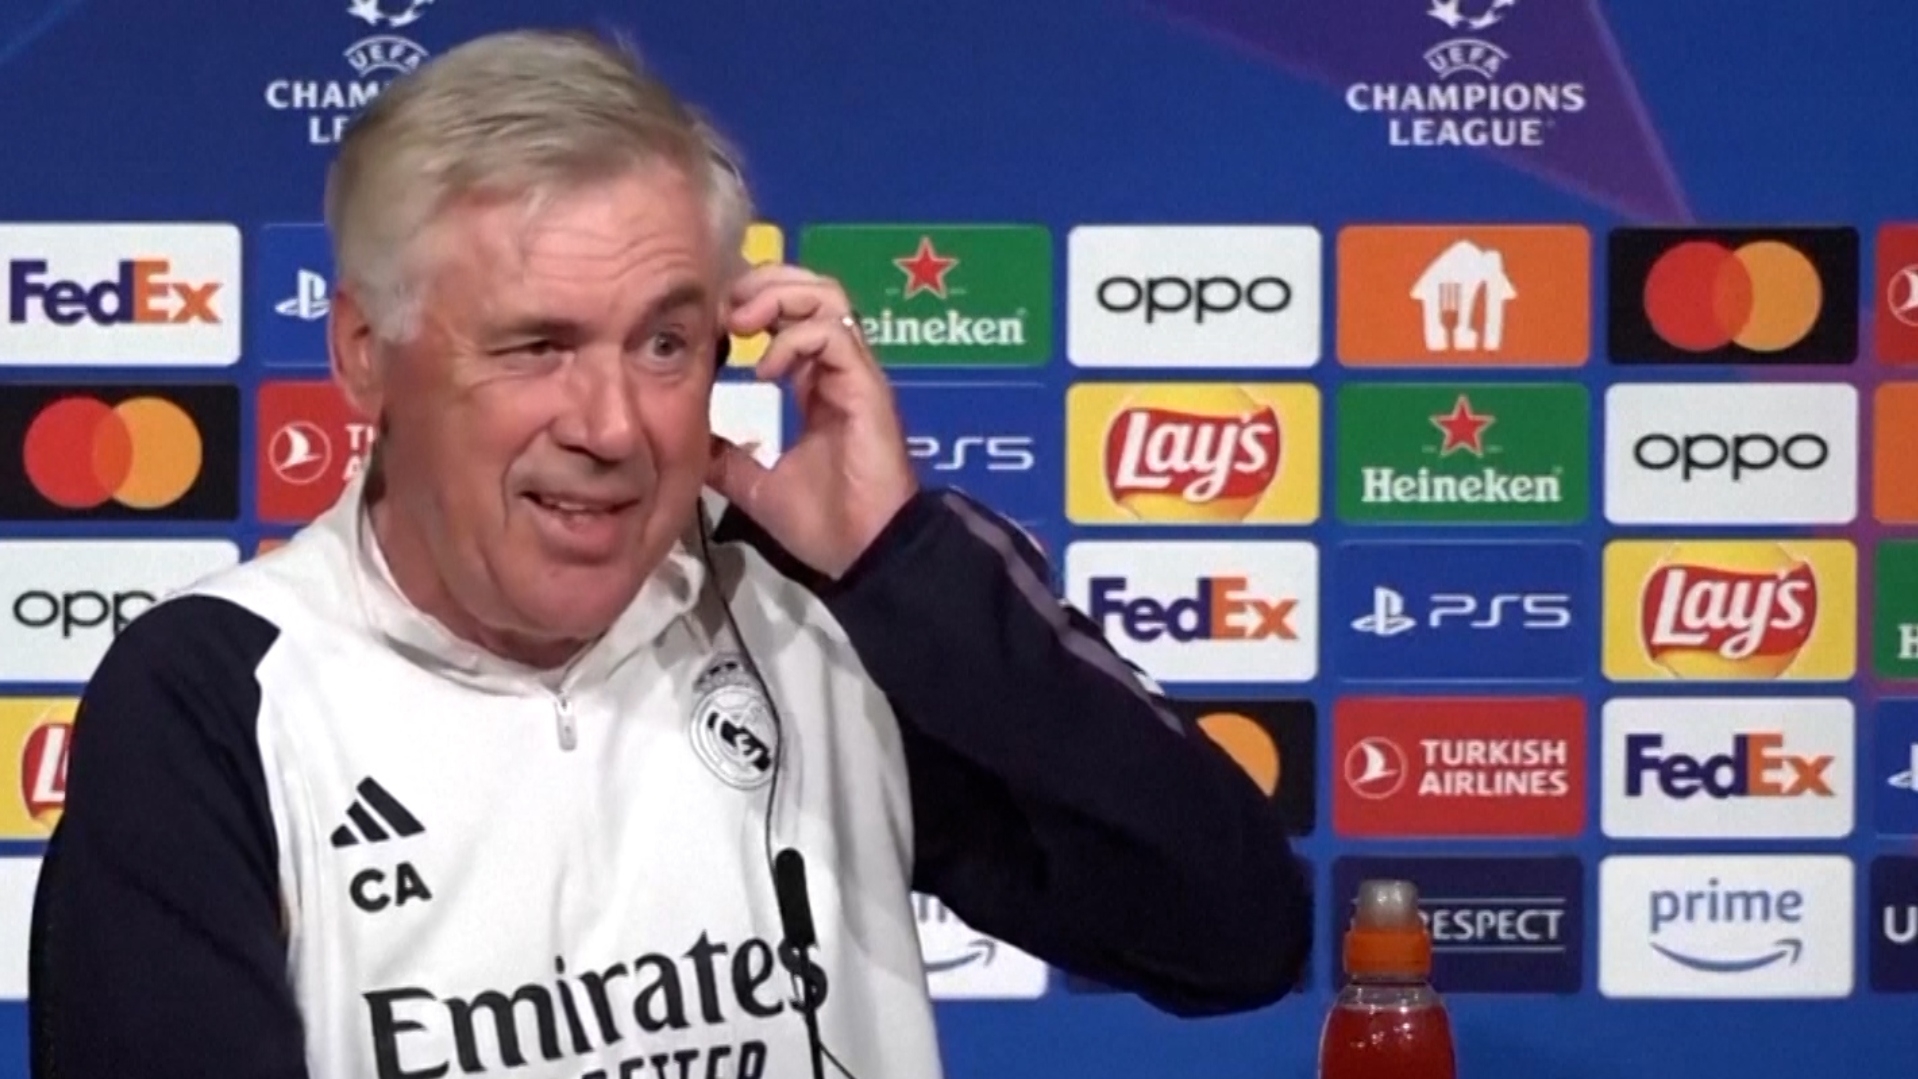 'I have forgotten German!' - Ancelotti left red-faced on return to Bayern